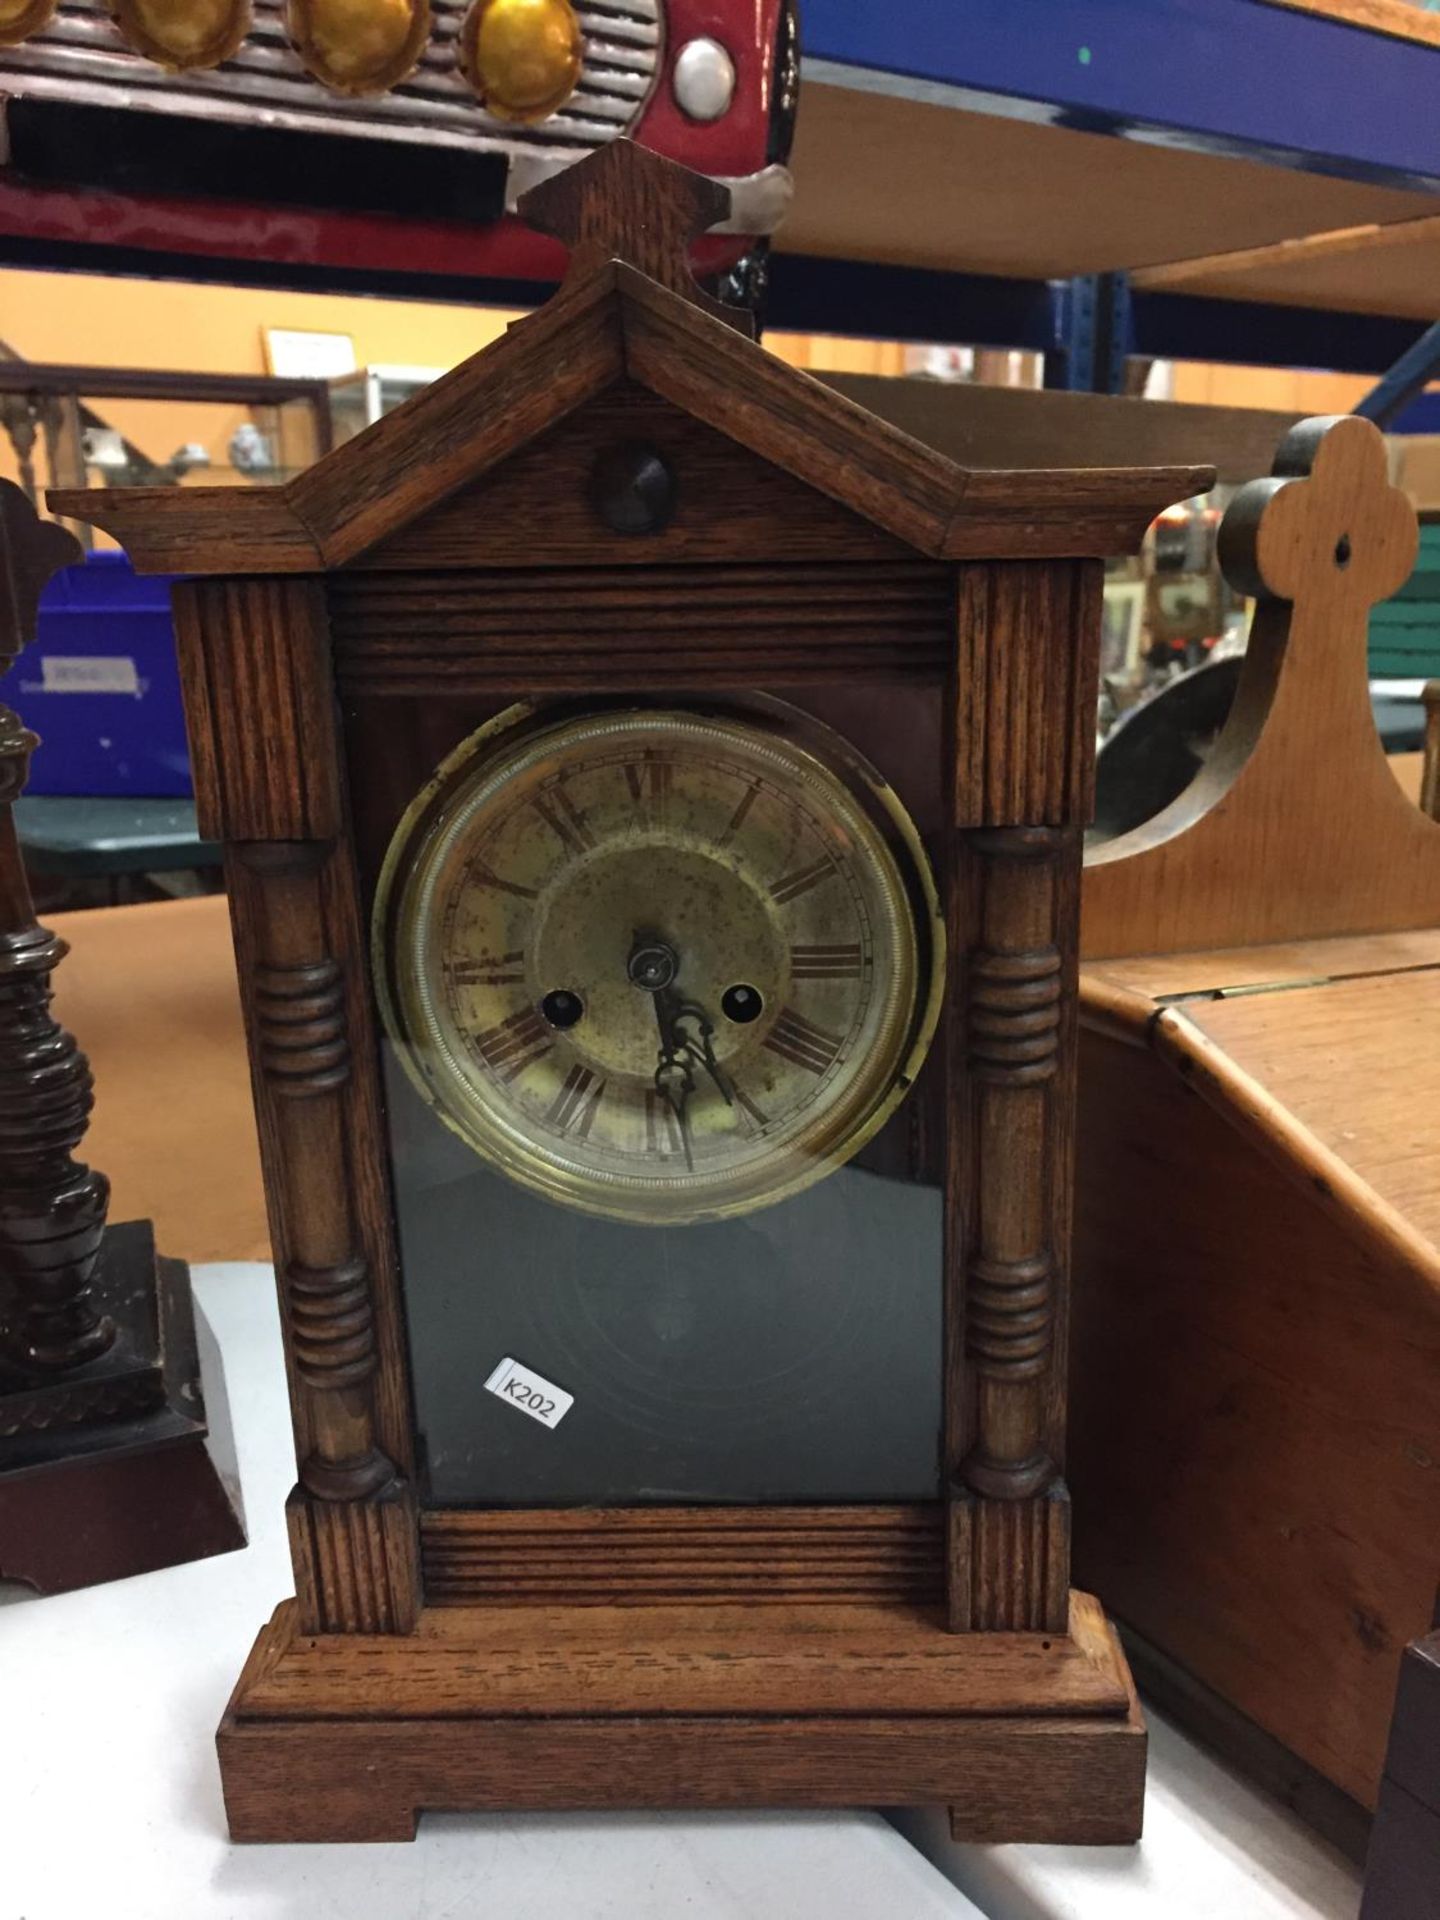 A VINTAGE AMERICAN GOTHIC STYLE CLOCK IN A WOODEN AND GLASS CASE WITH A BUTTERFLY PATTERN ON THE - Image 8 of 8